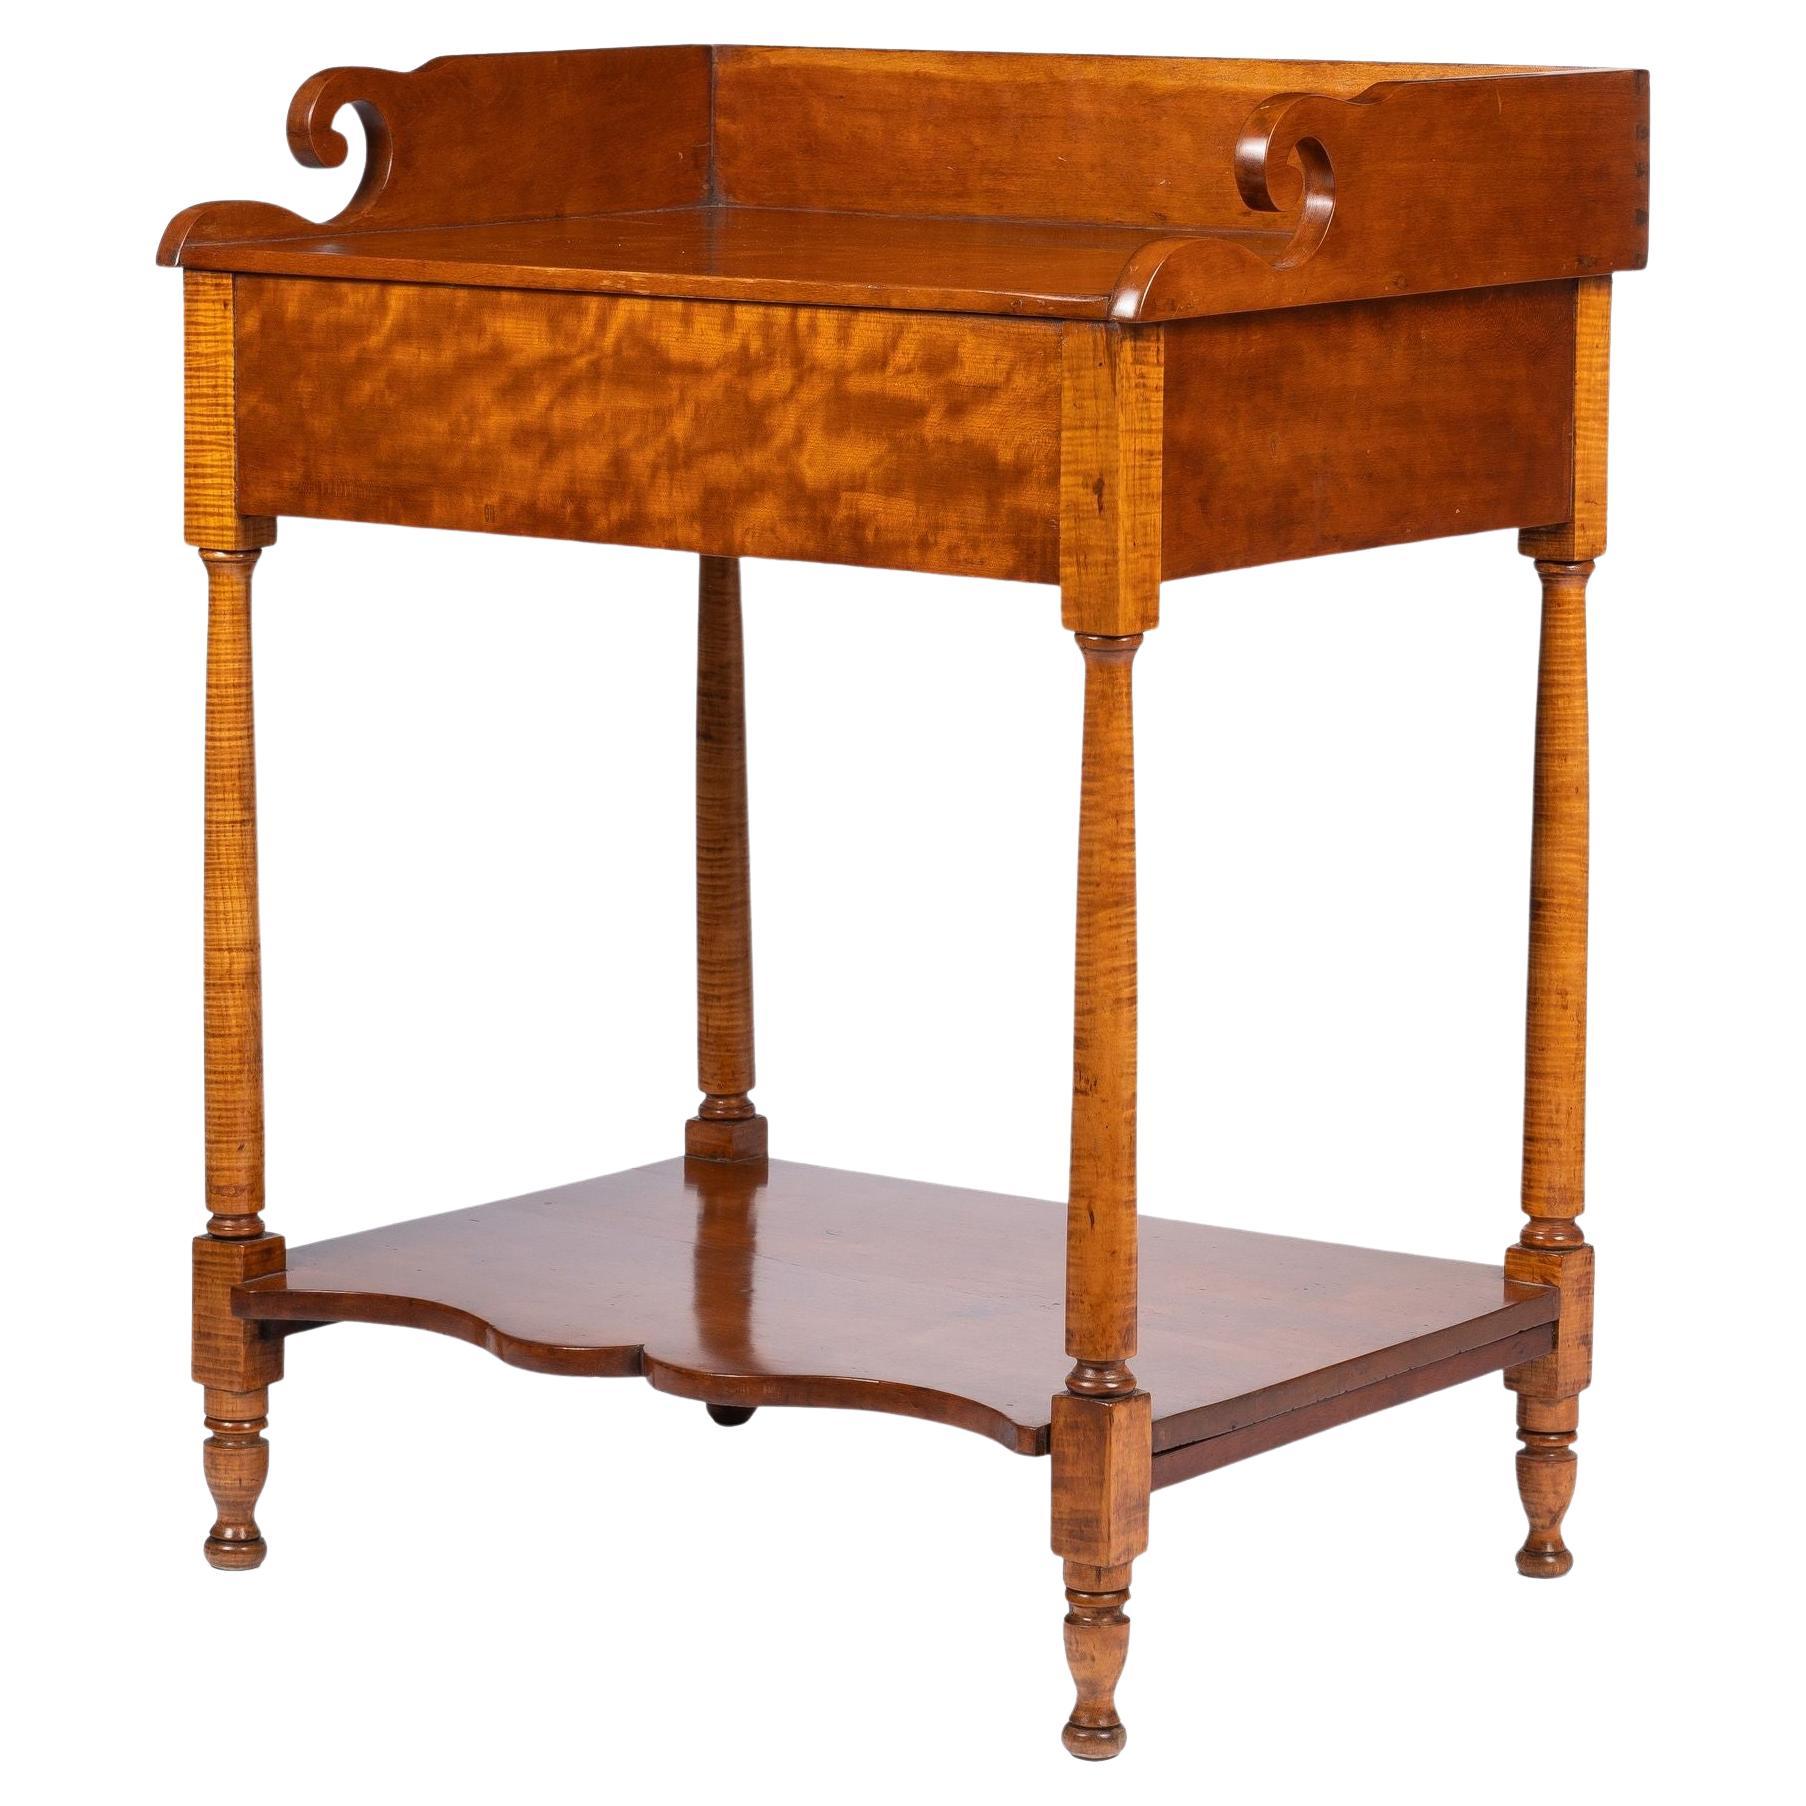 Philadelphia Cherry Wood Stand with Splash on a Conforming Apron, 1820